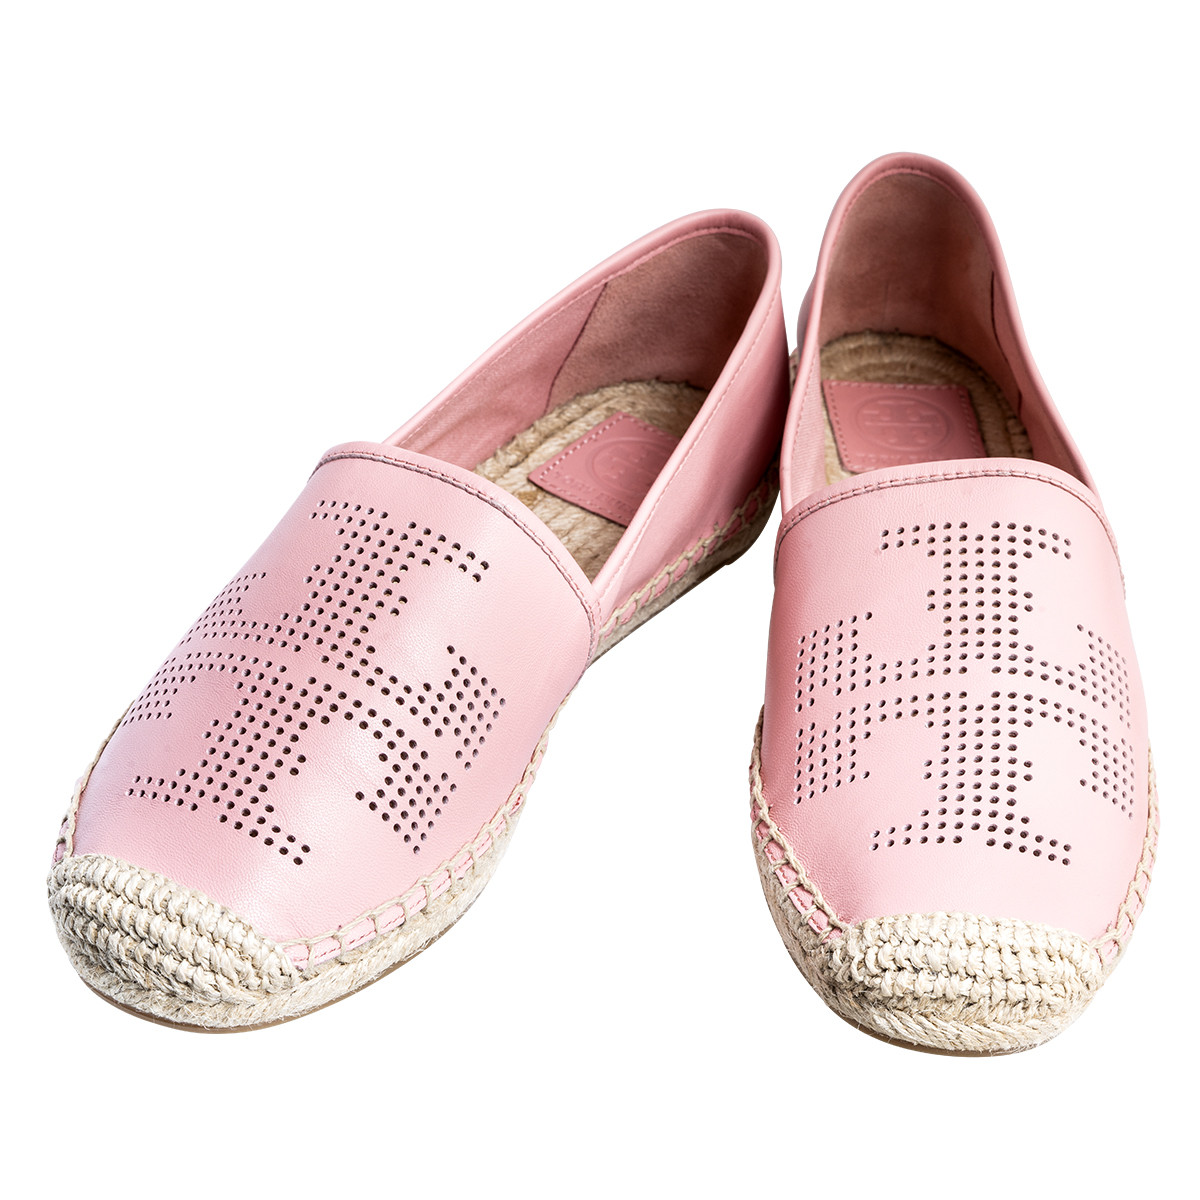 Like-New Tory Burch Perforated Espadrille Shoes